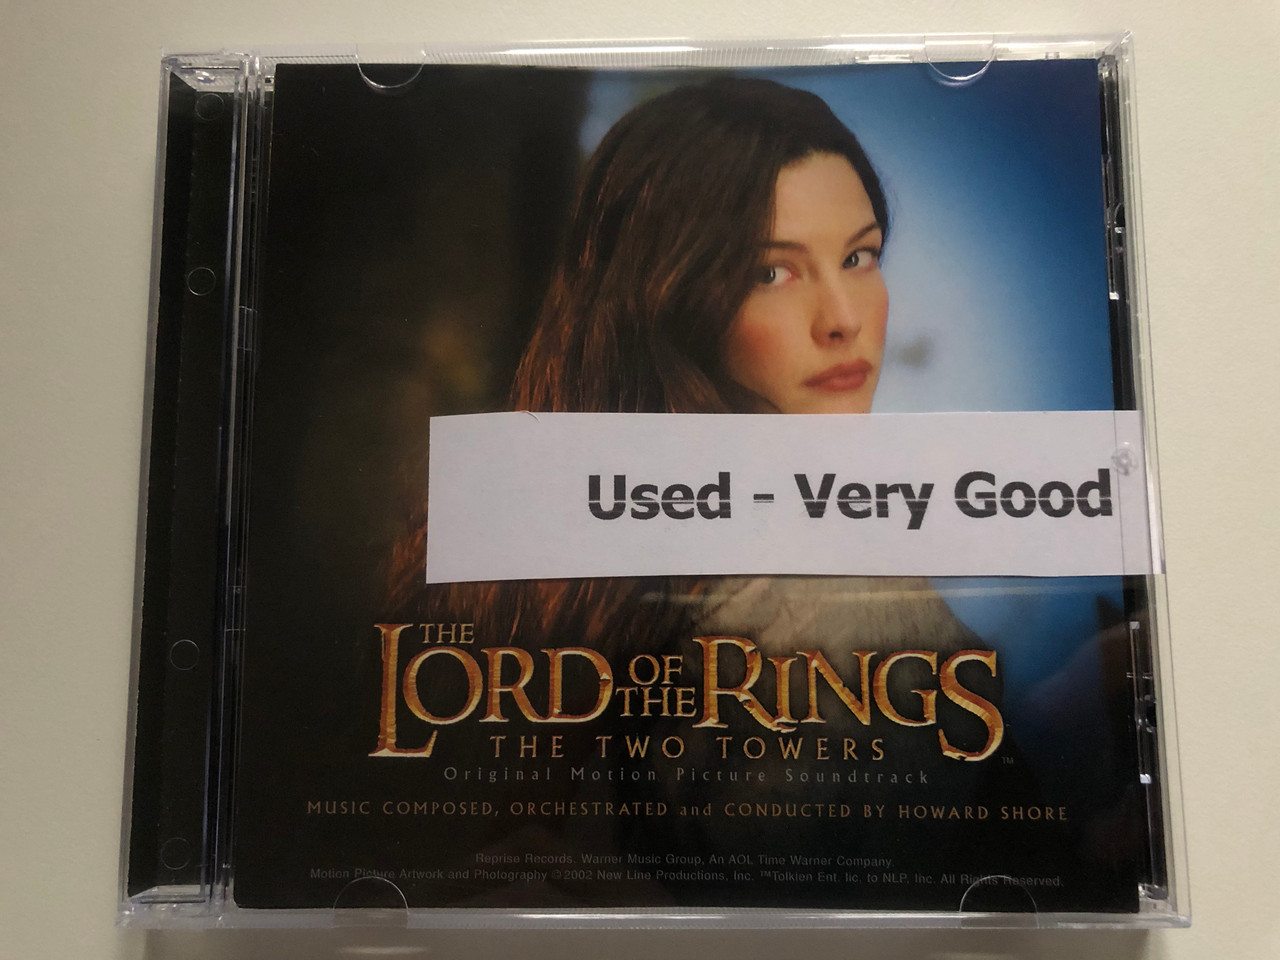 https://cdn10.bigcommerce.com/s-62bdpkt7pb/products/0/images/216378/The_Lord_Of_The_Rings_The_Two_Towers_Original_Motion_Picture_Soundtrack_Music_Composed_Orchestrated_and_Conducted_By_Howard_Shore_Reprise_Records_Audio_CD_2002_9362-48379-2_1__76476.1647271831.1280.1280.JPG?c=2&_gl=1*lh045y*_ga*MjA2NTIxMjE2MC4xNTkwNTEyNTMy*_ga_WS2VZYPC6G*MTY0NzI3MDg0Ny4zMTkuMS4xNjQ3MjcxNzIyLjYw